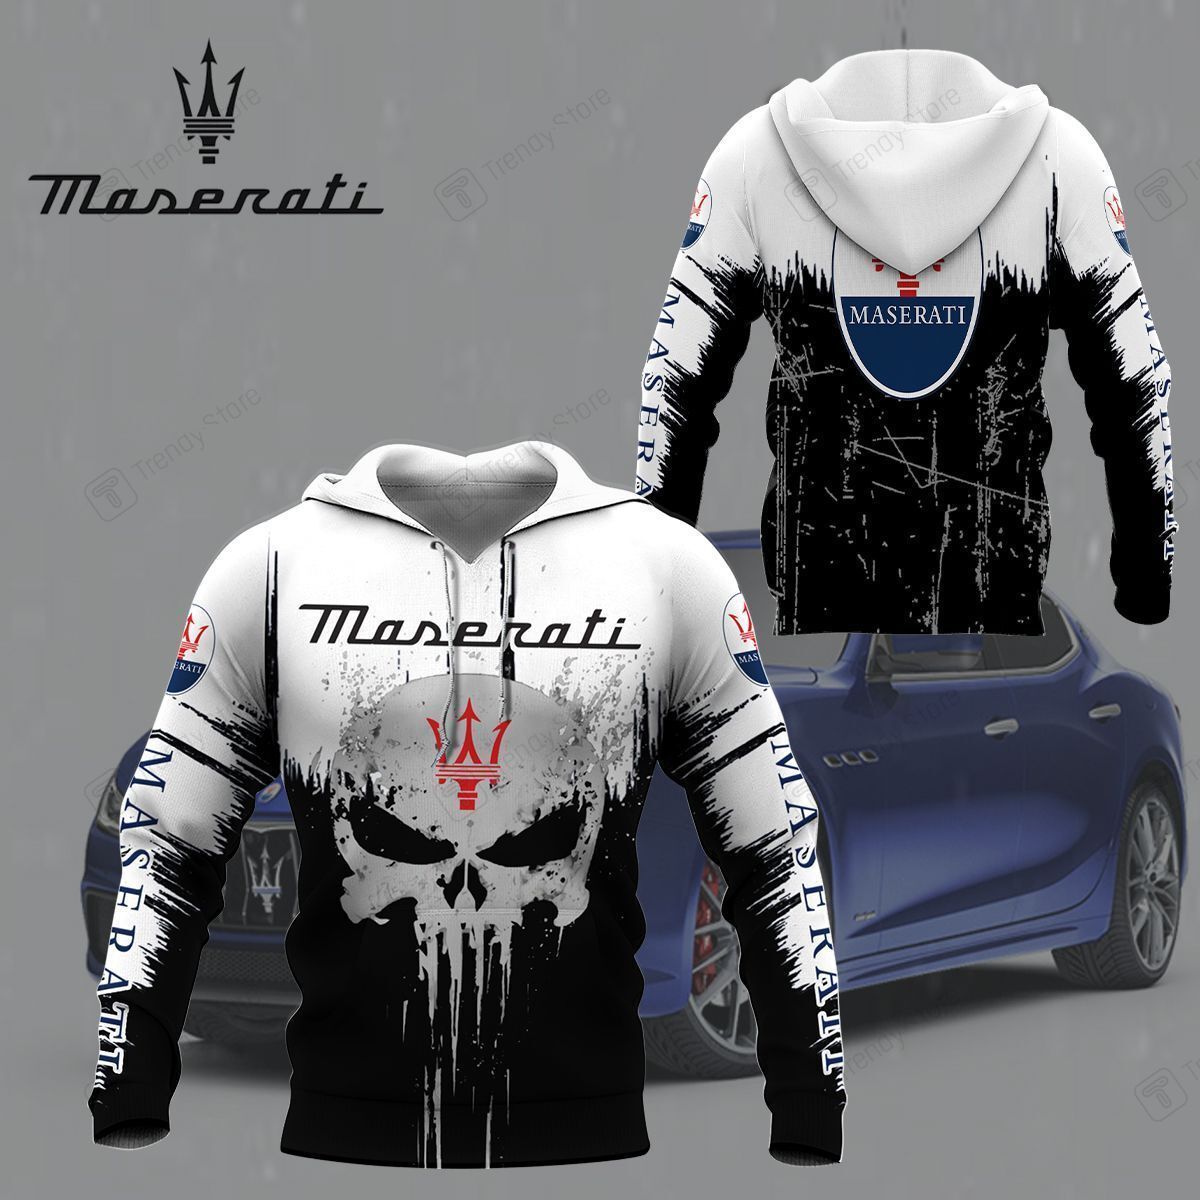 3D ALL OVER PRINTED MASERATI SHIRTS VER 3 (WHITE)